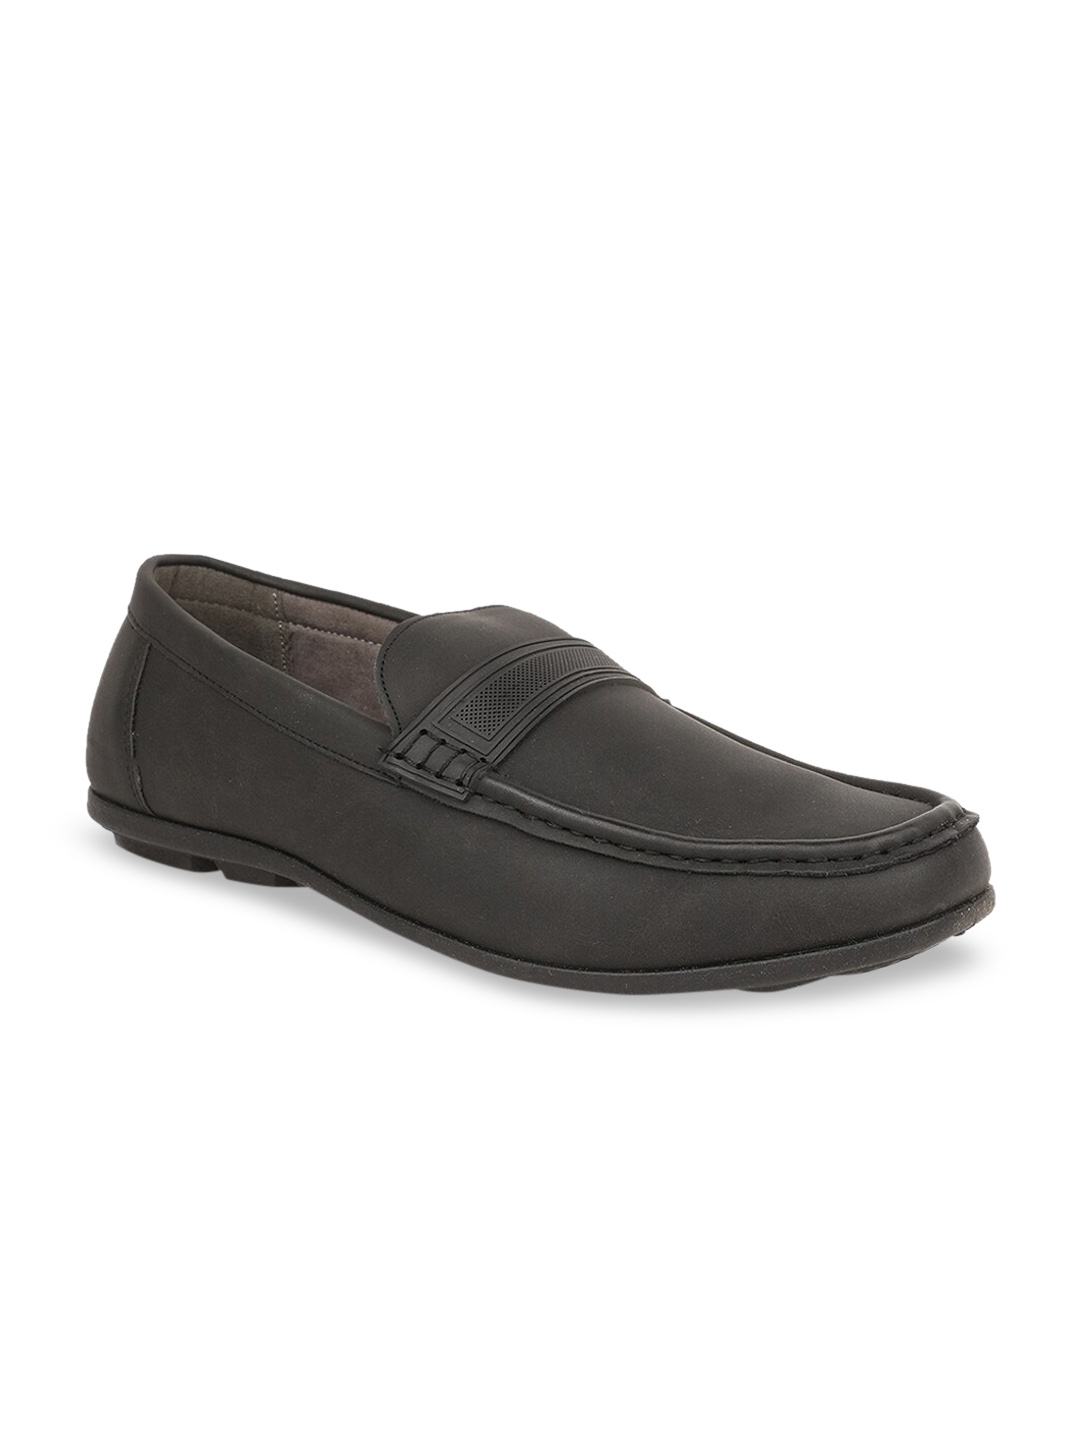 Buy Bata Men Black Solid Loafers - Casual Shoes for Men 12990888 | Myntra